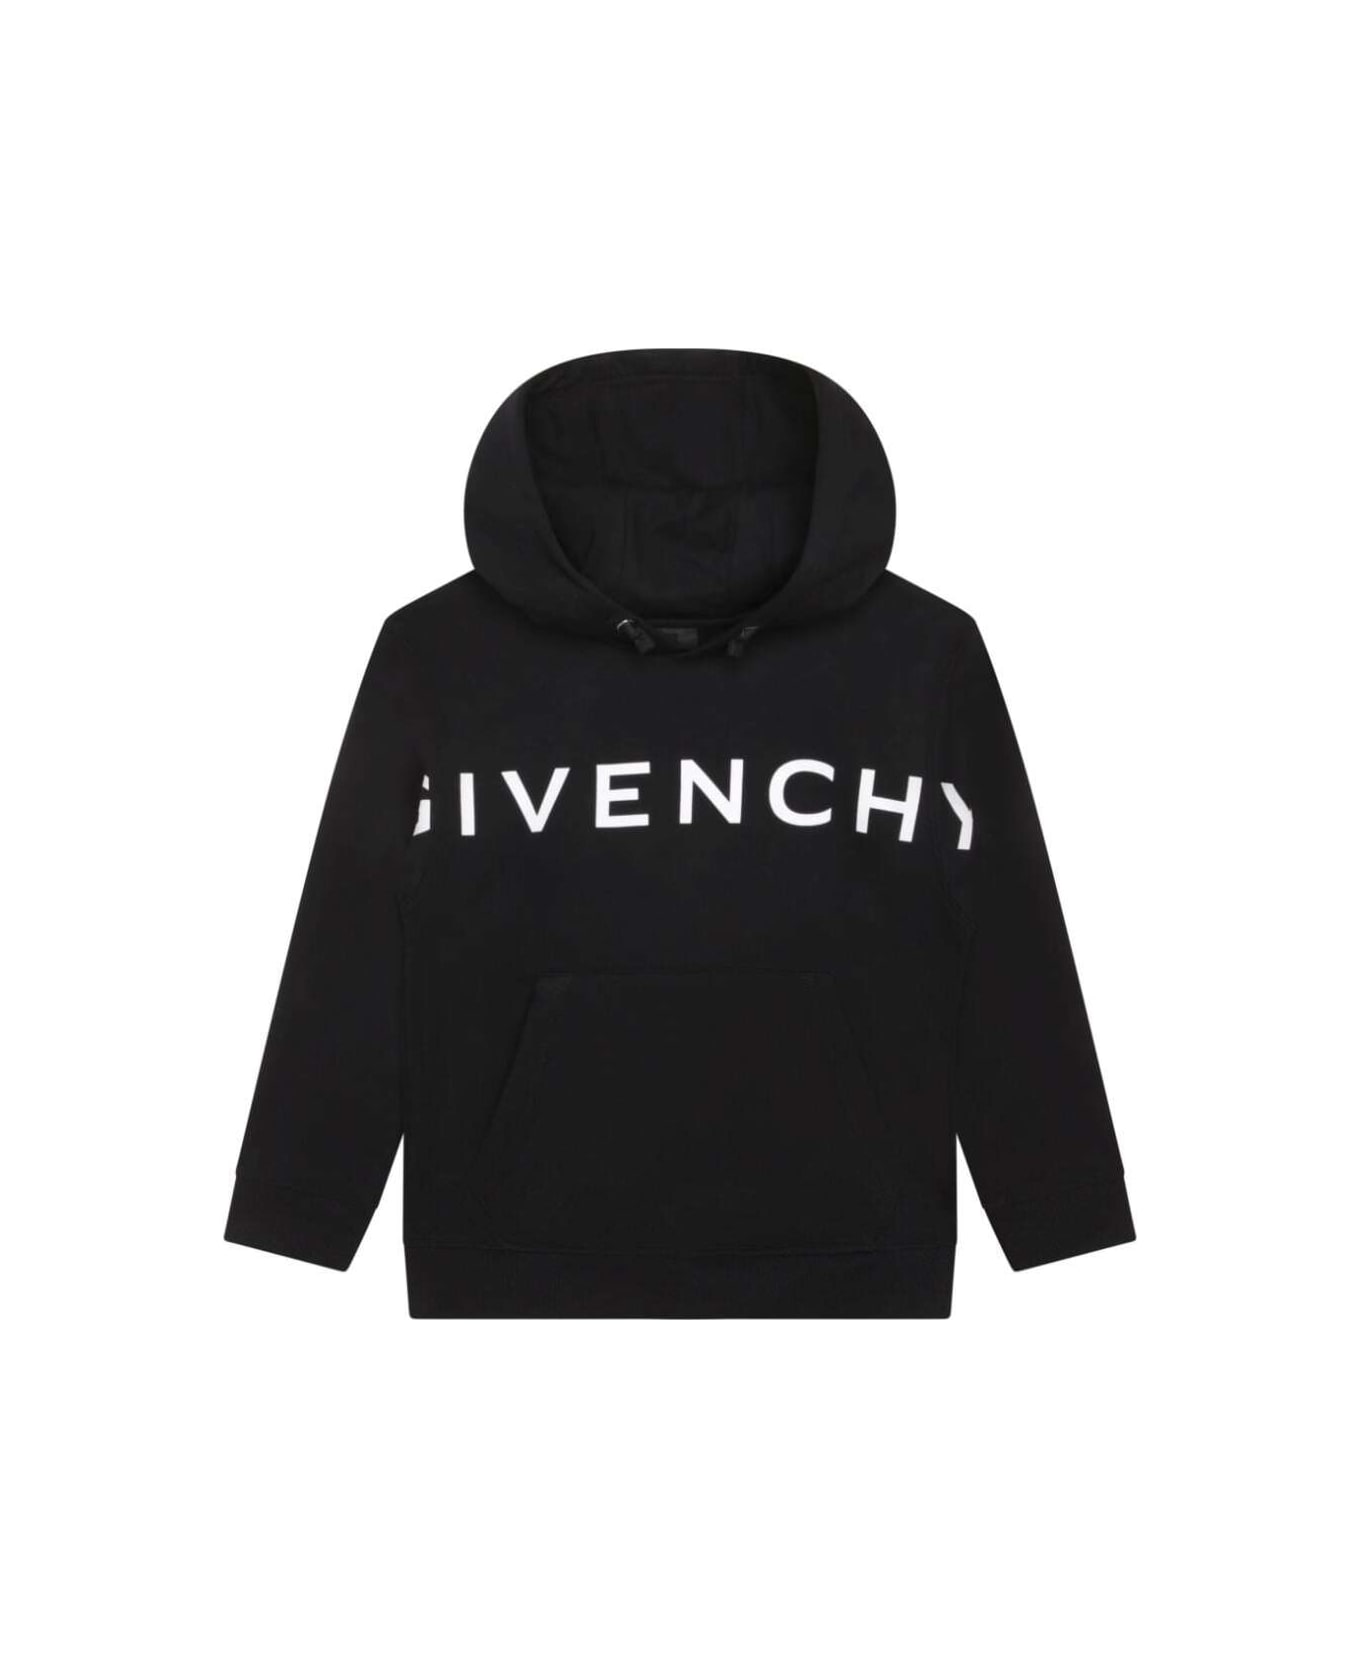 Givenchy Black Hoodie And Contrasting Maxi Logo At The Front Boy - B Nero